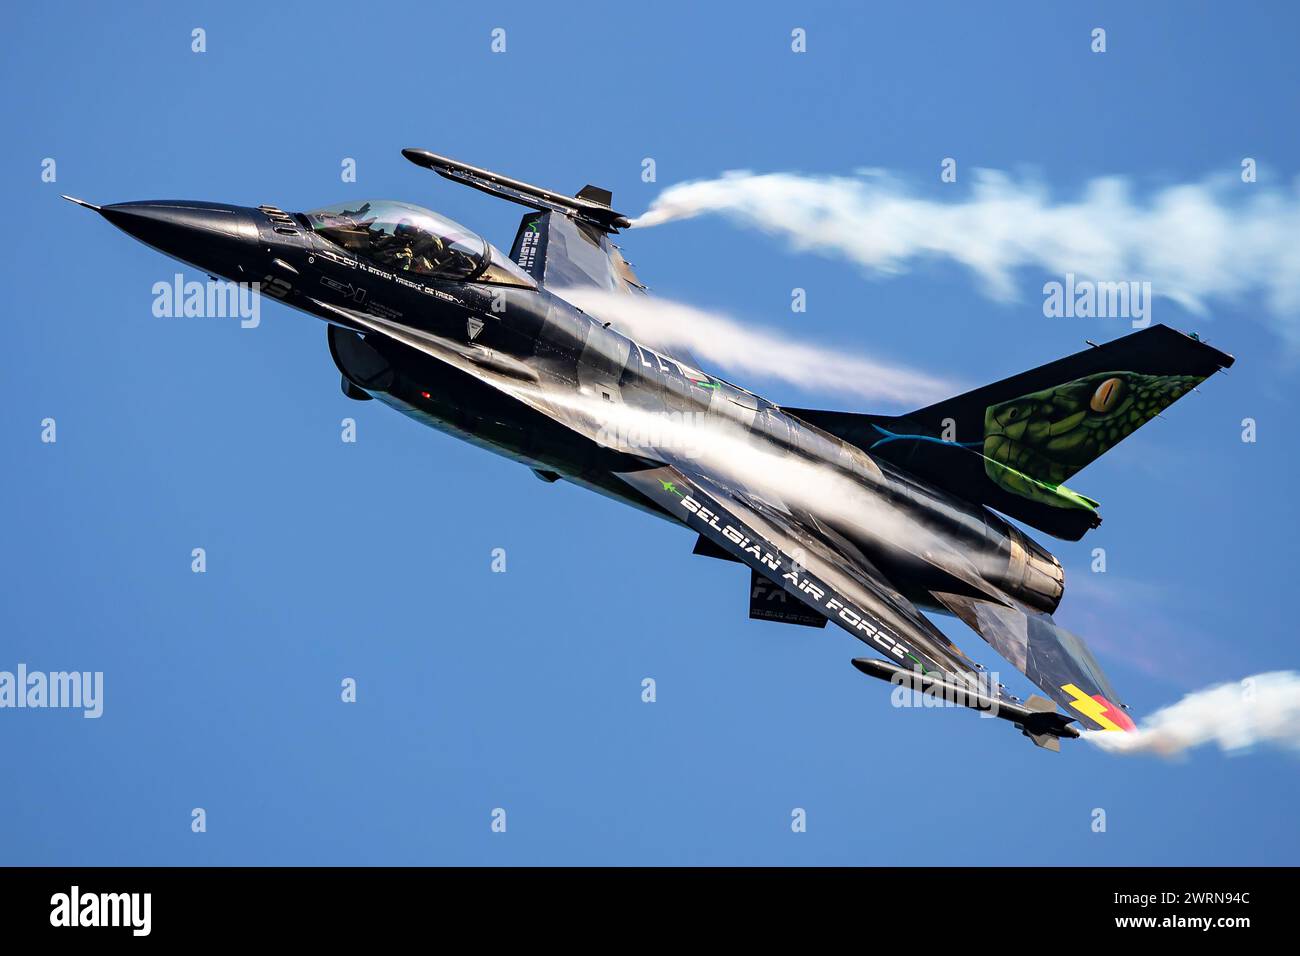 Radom, Poland - August 25, 2023: Belgian Air Force Lockheed F-16 Fighting Falcon fighter jet plane flying. Aviation and military aircraft. Stock Photo